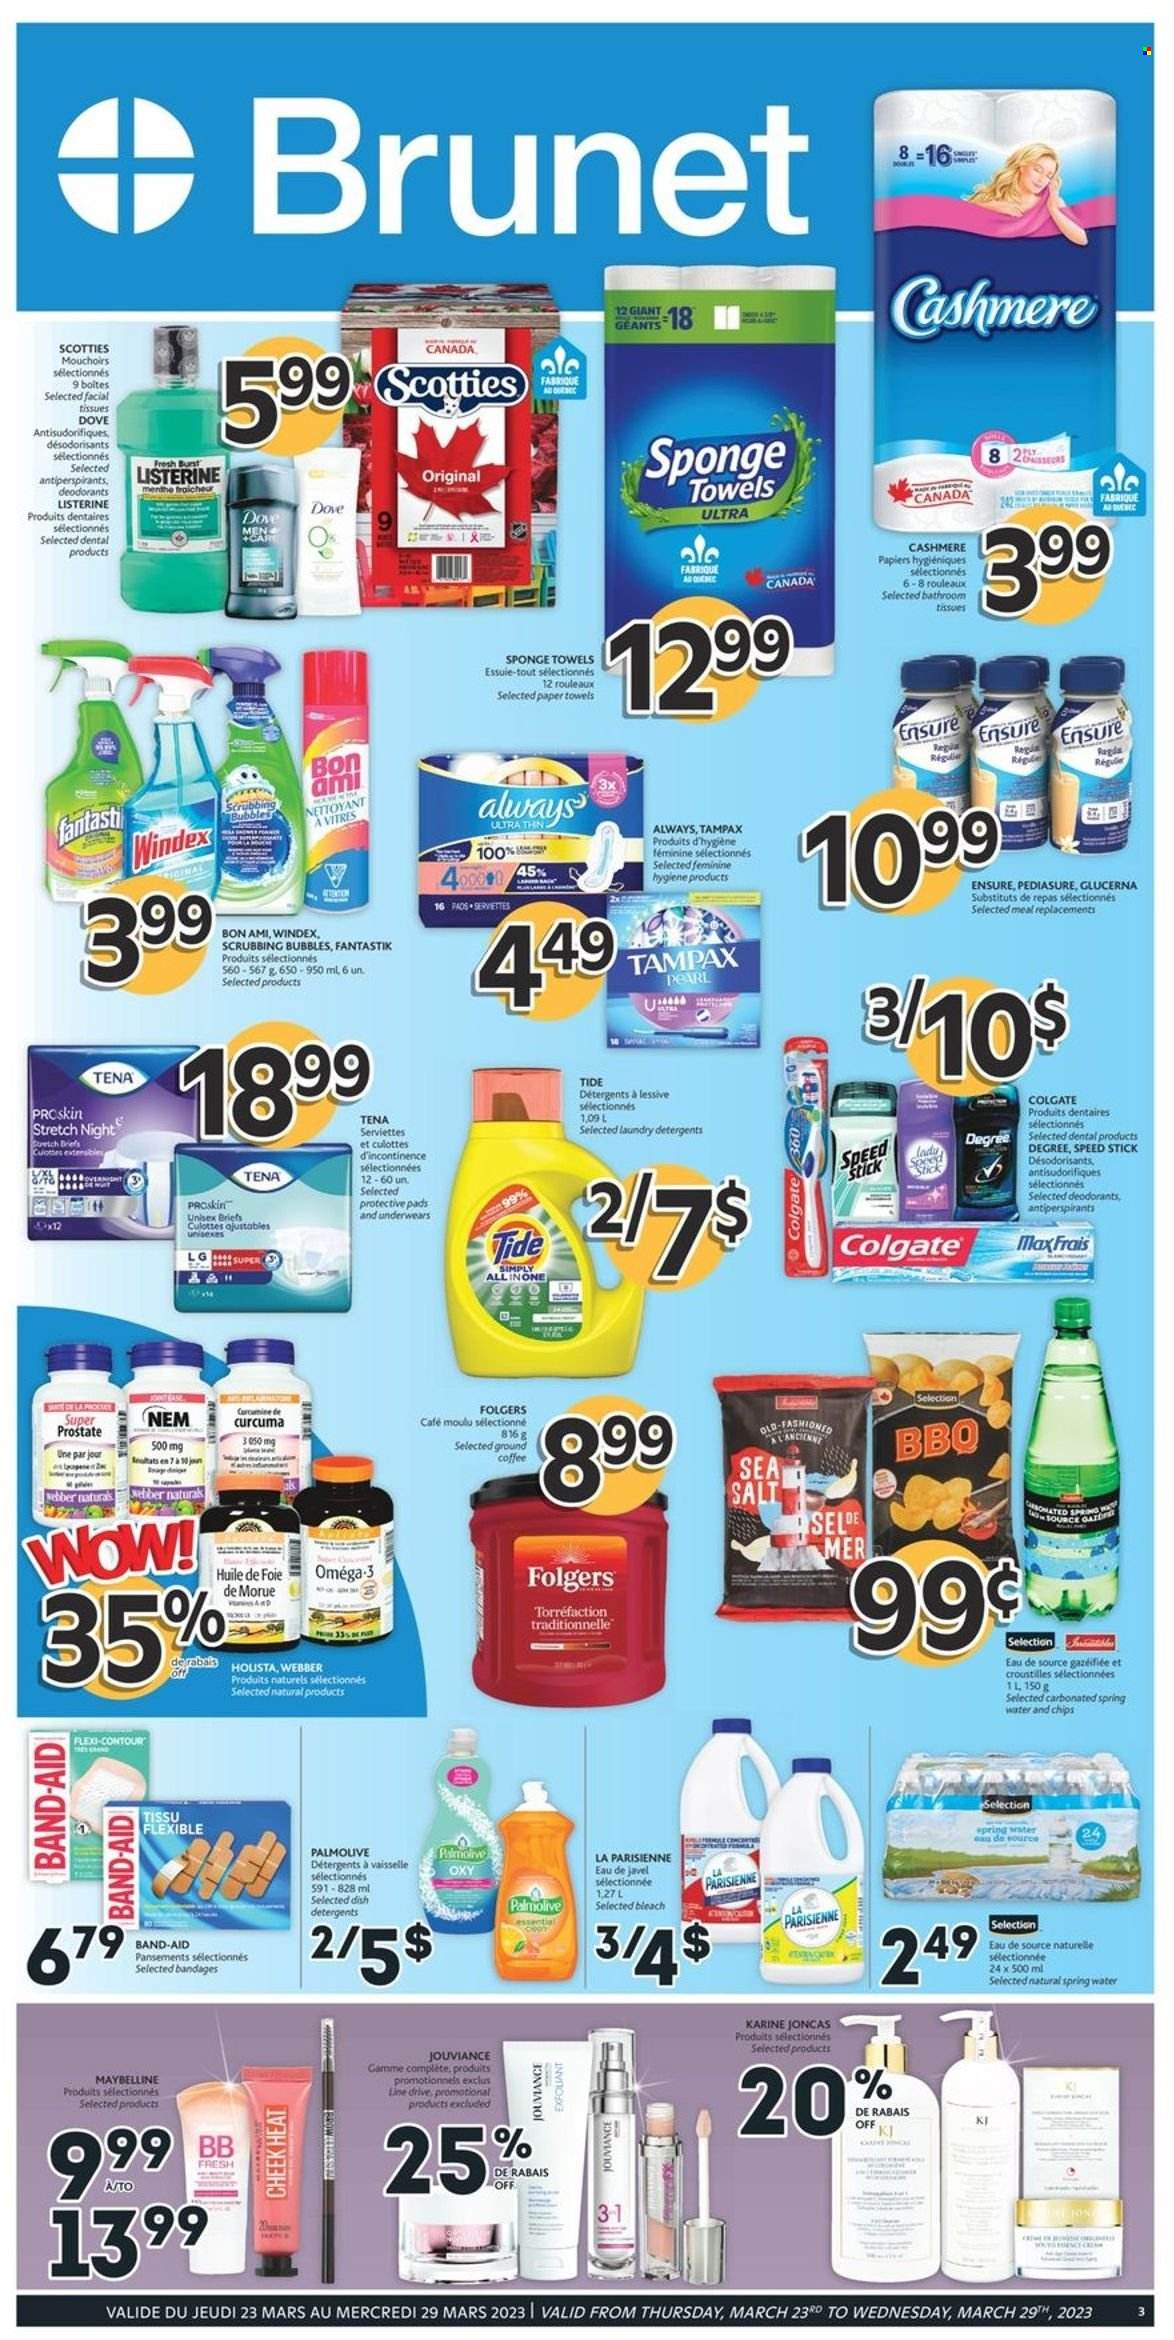 thumbnail - Brunet Flyer - March 23, 2023 - March 29, 2023 - Sales products - Dove, Mars, chips, spring water, water, coffee, Folgers, ground coffee, toilet paper, tissues, kitchen towels, paper towels, Windex, Scrubbing Bubbles, bleach, Tide, Palmolive, facial tissues, Speed Stick, Maybelline, contour, Omega-3, Glucerna, band-aid, Colgate, Listerine, Tampax, deodorant. Page 1.